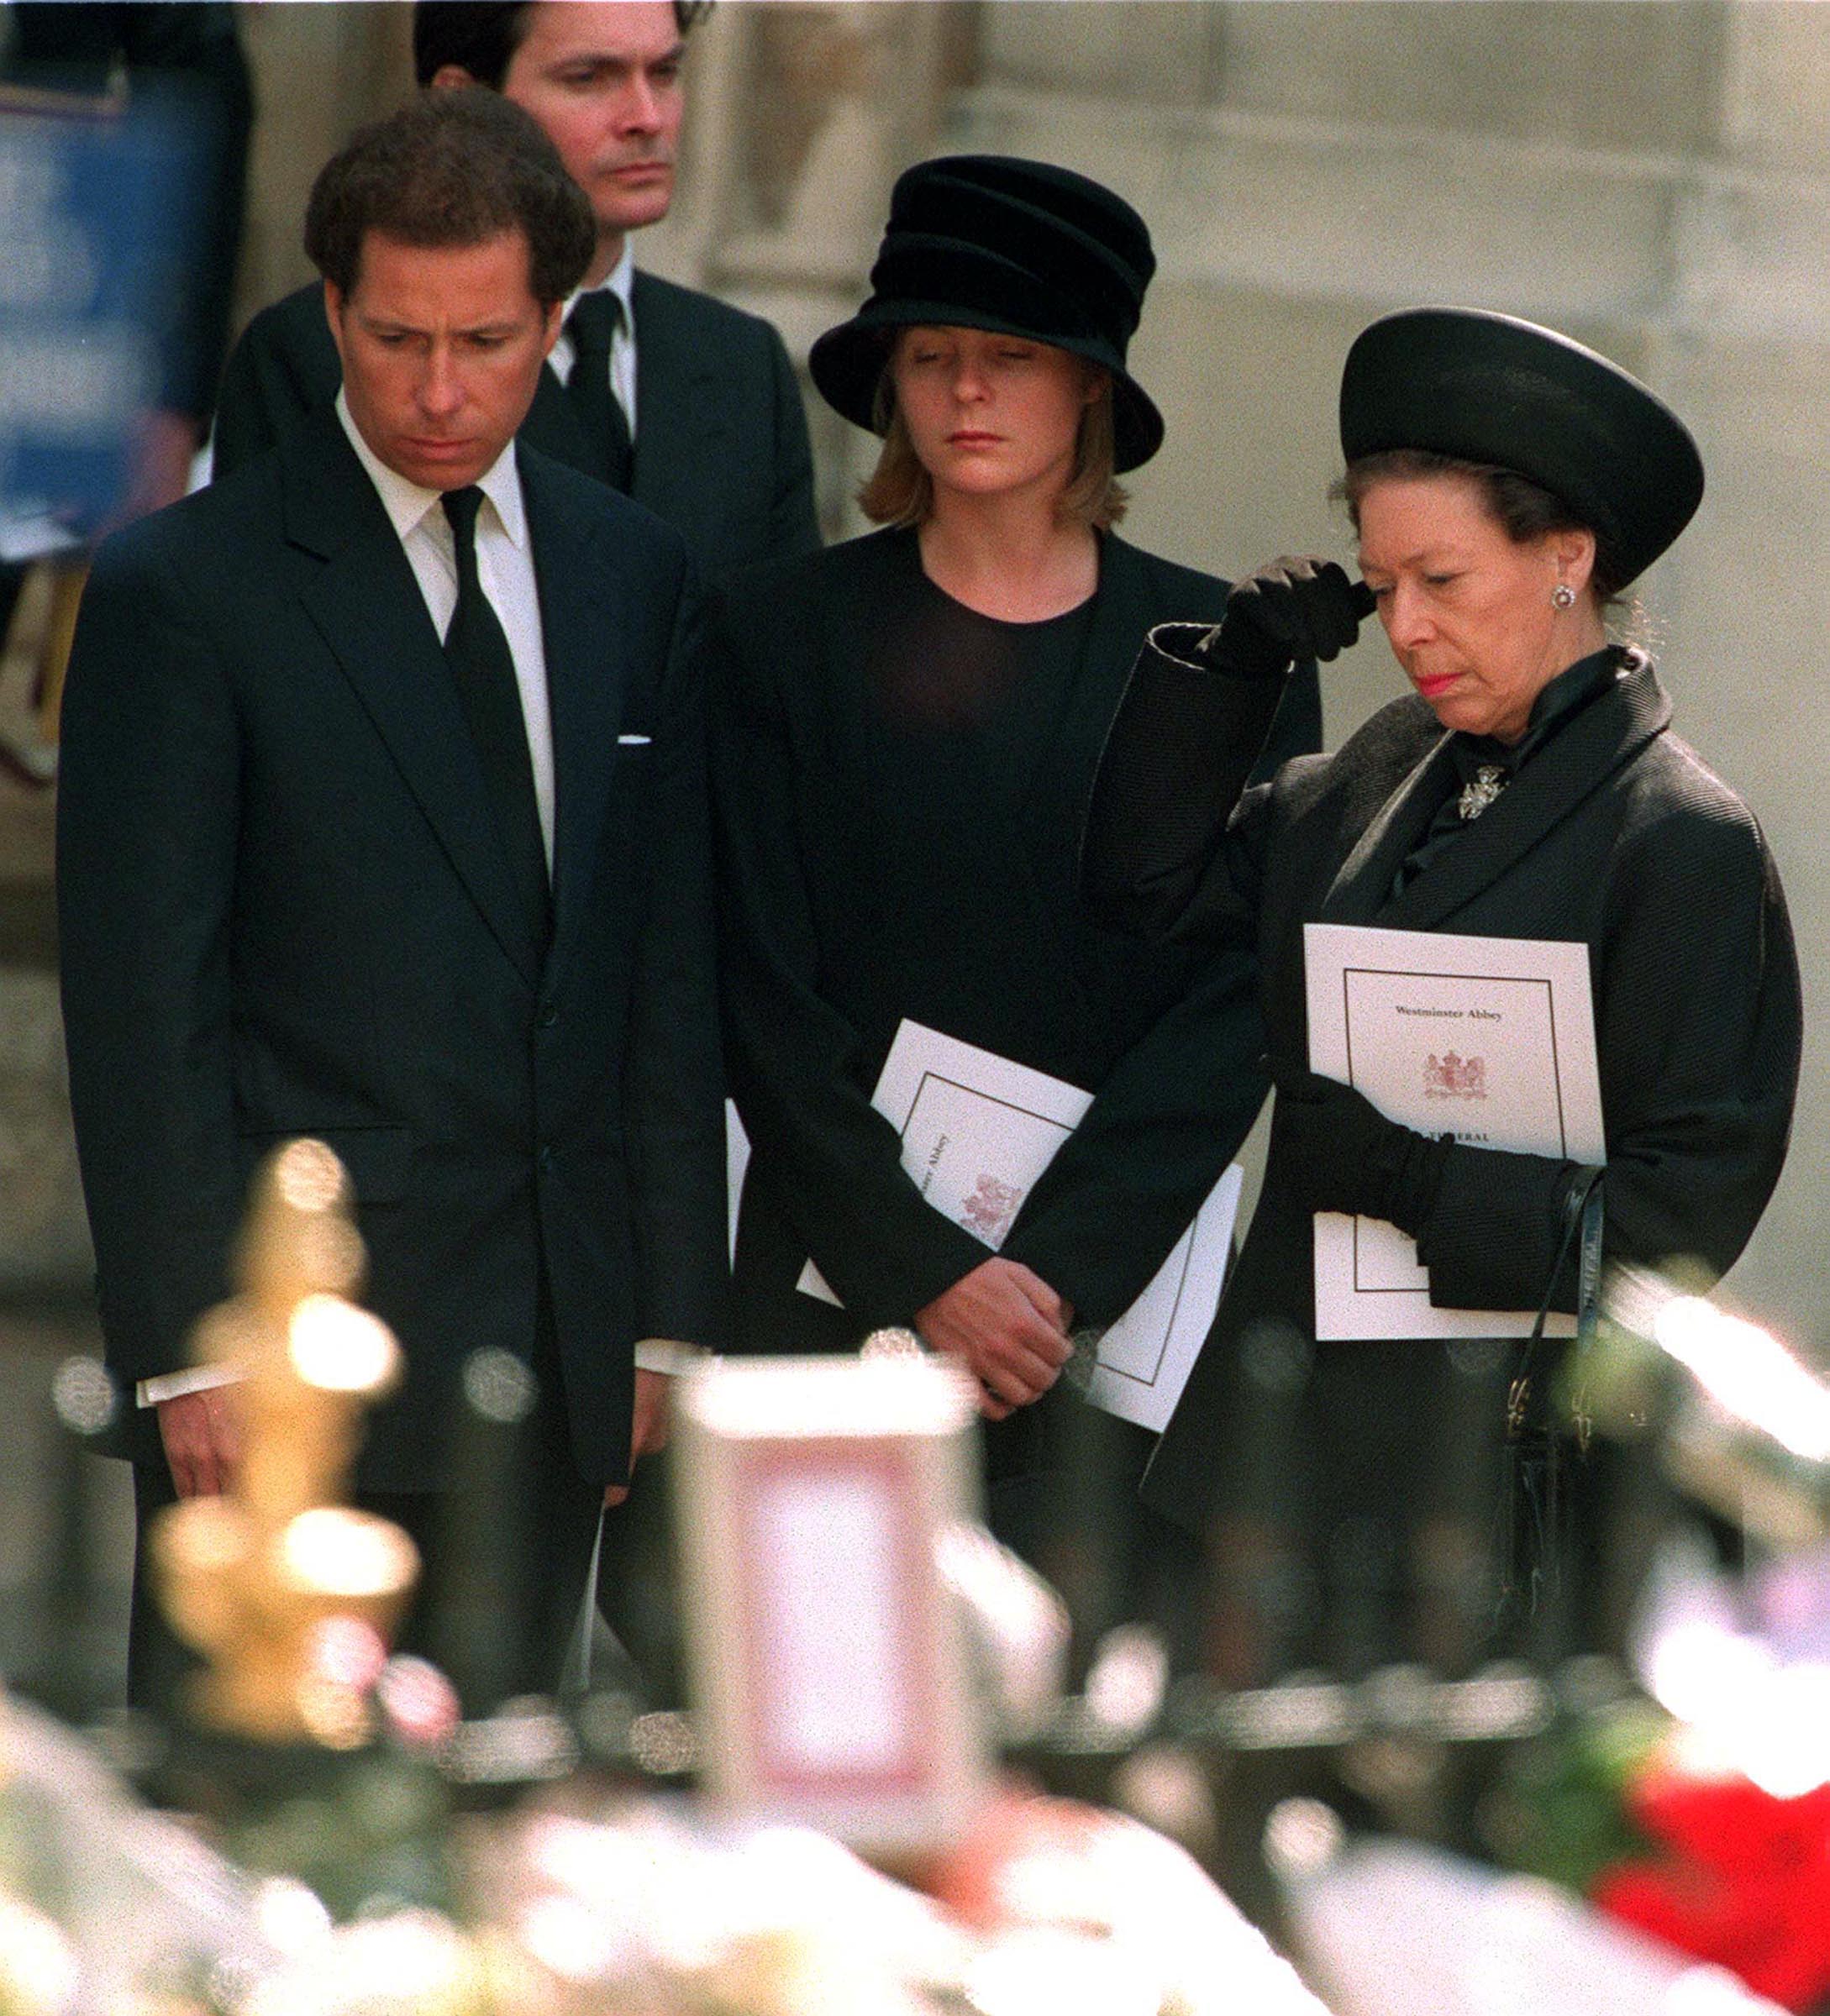 Princess Margaret with her son Lord Linley and his wife Lady Serena Linley leaving Westminster Abbey after the funeral service for Diana, Princess of Wales, September 6, 1997 | Photo: Getty Images